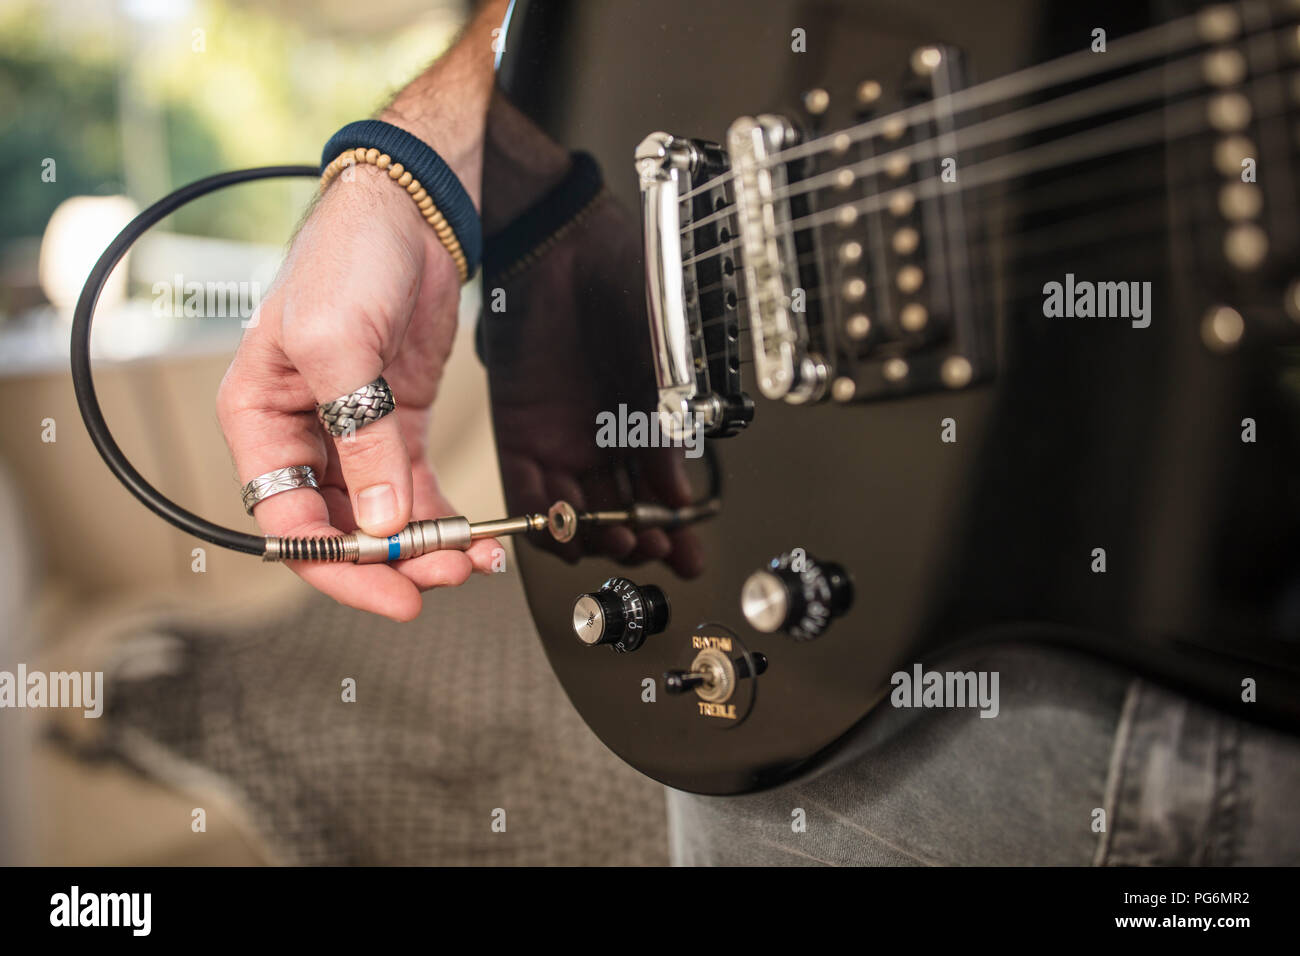 Close-up of man's hand plugging electric guitar Stock Photo